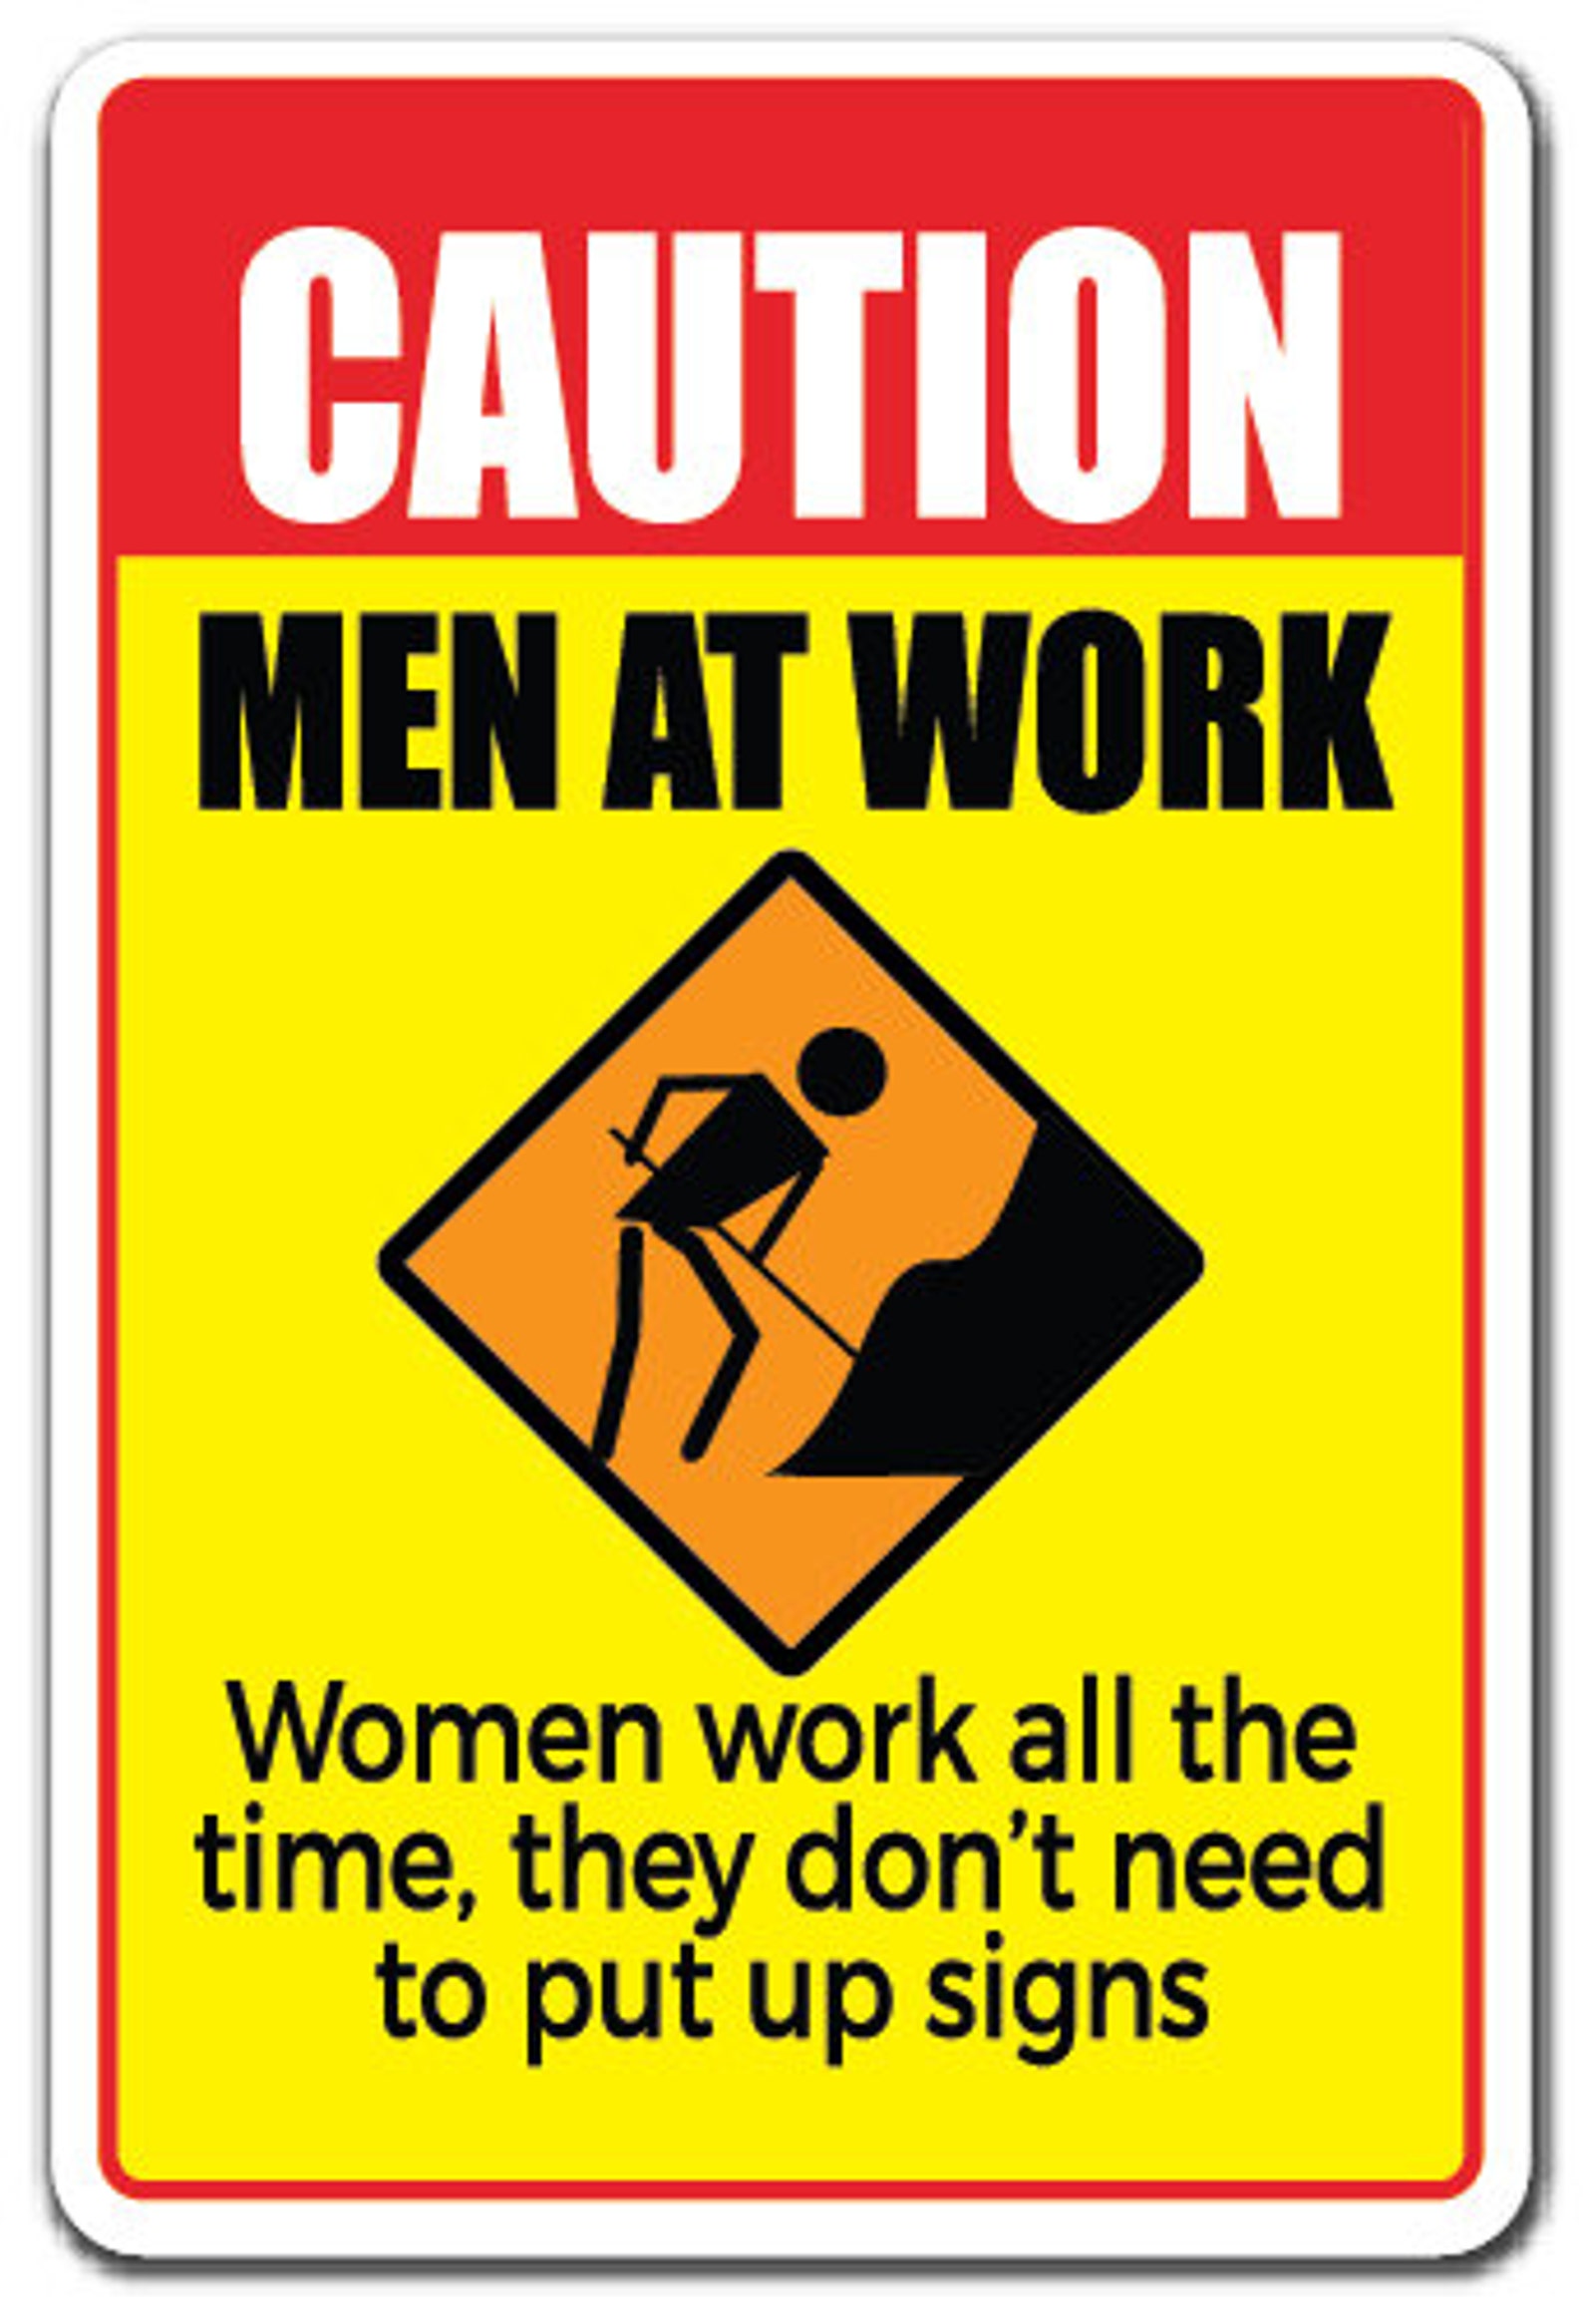 Caution Men At Work Novelty Sign Women Work Warning Funny T Etsy